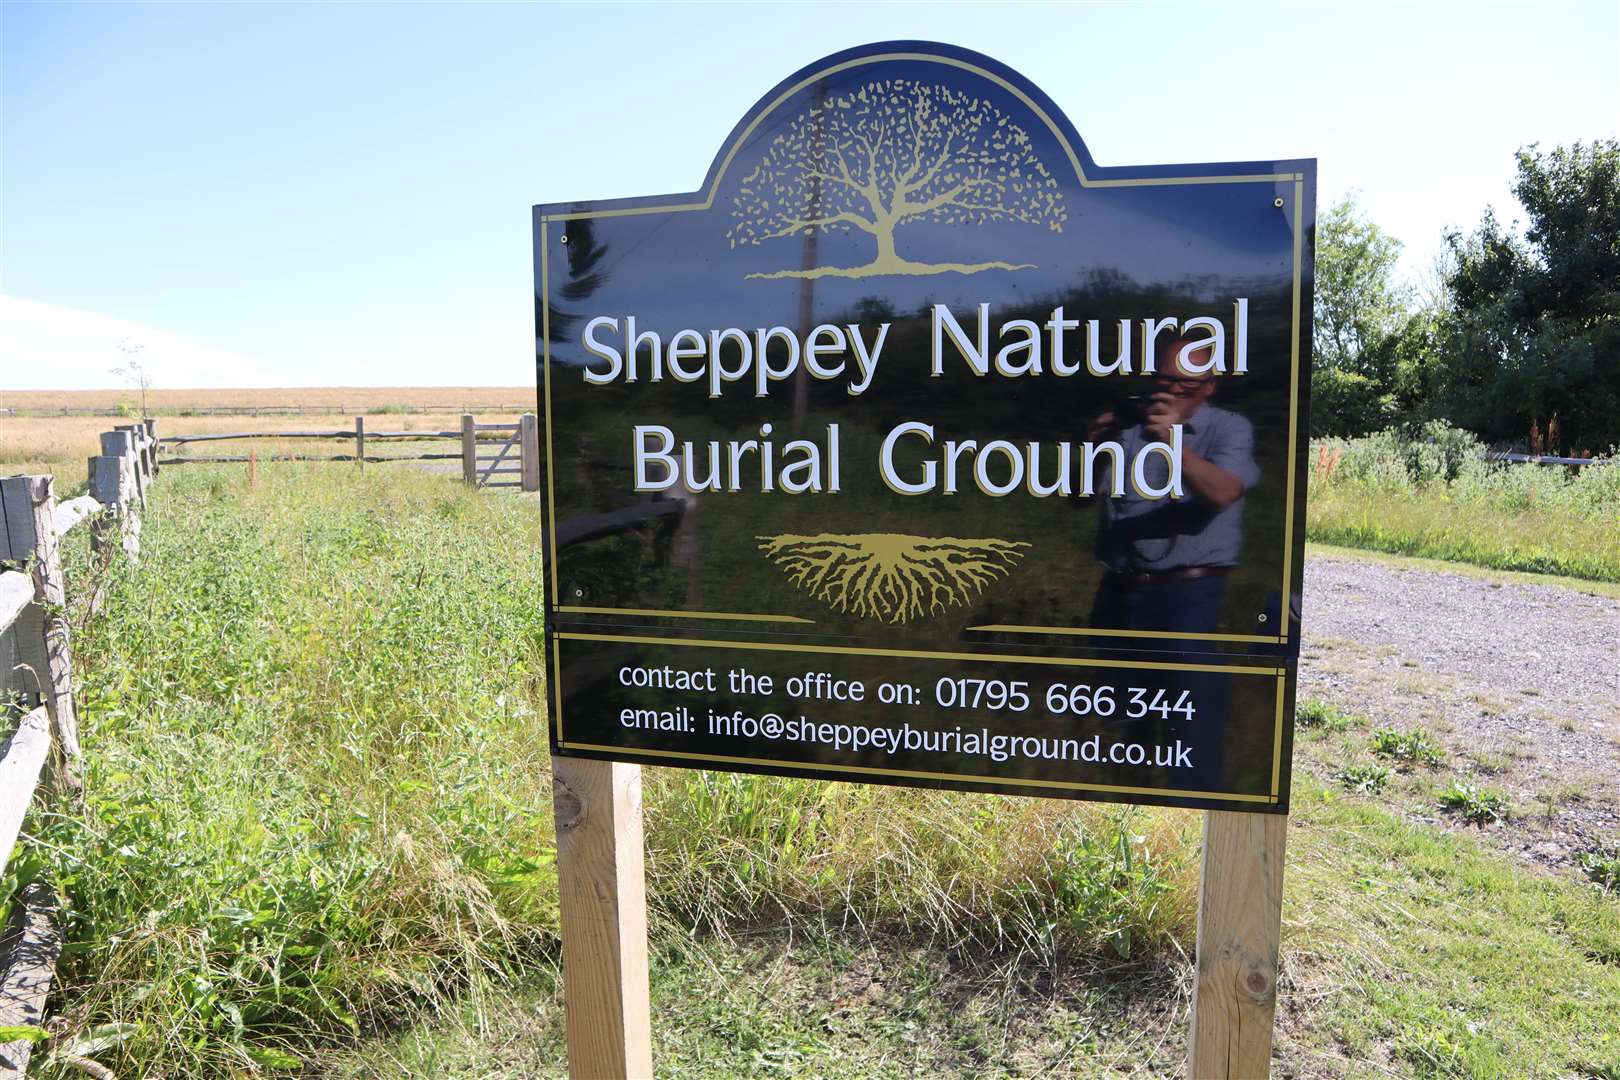 Sheppey Natural Burial Ground in Harty Ferry Road, Harty